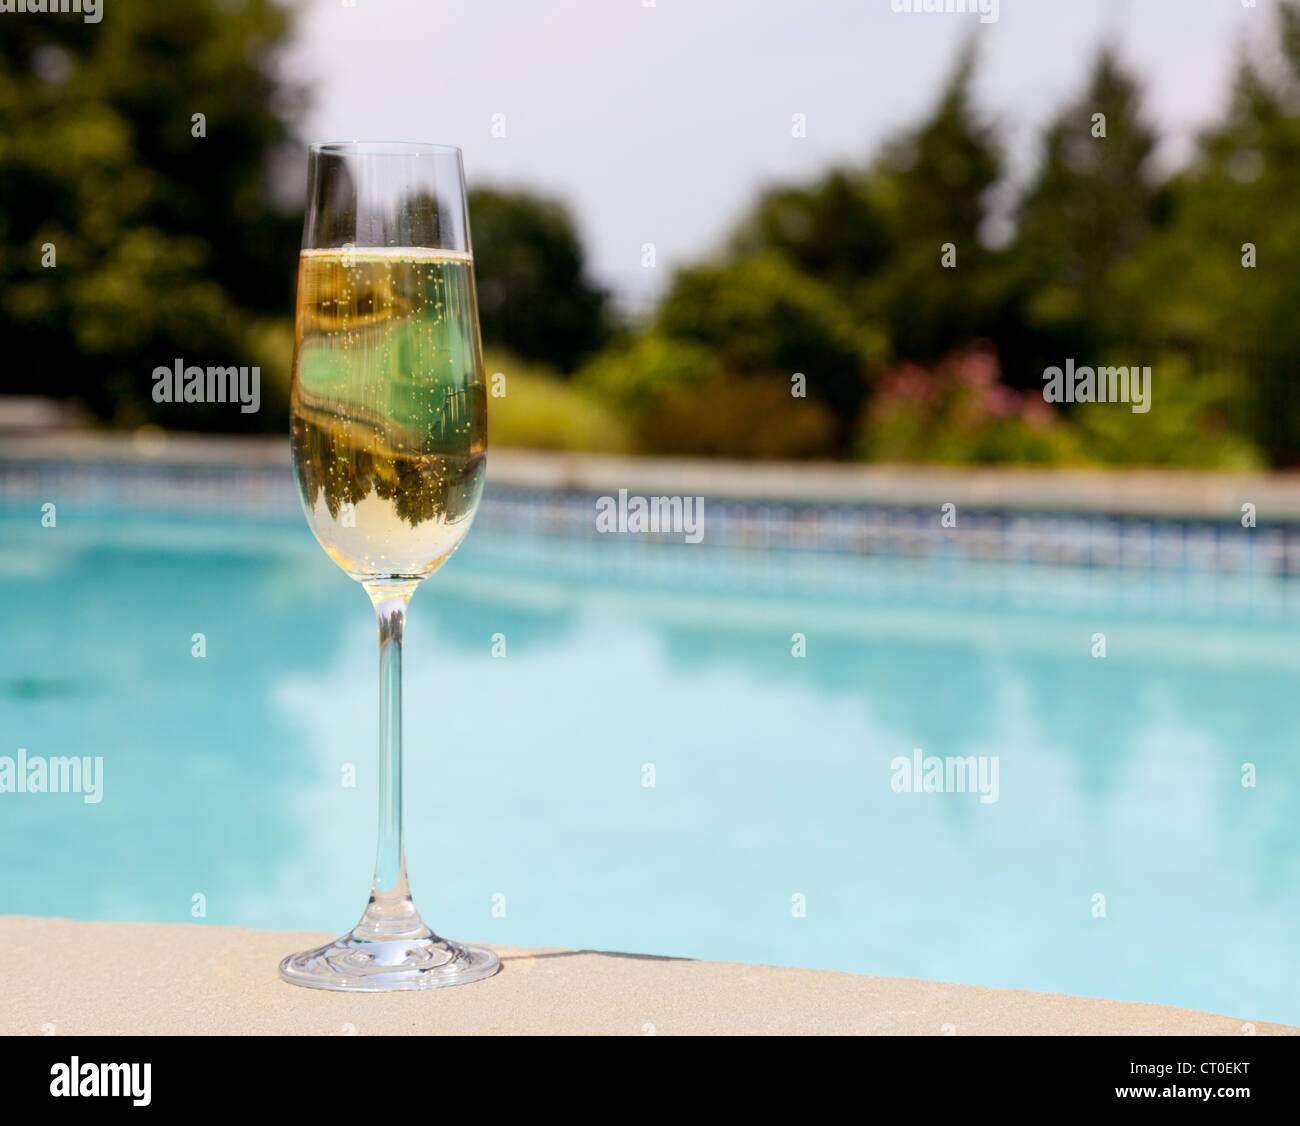 Elegant flute glass of sparkling white wine or champagne by side of swimming pool Stock Photo